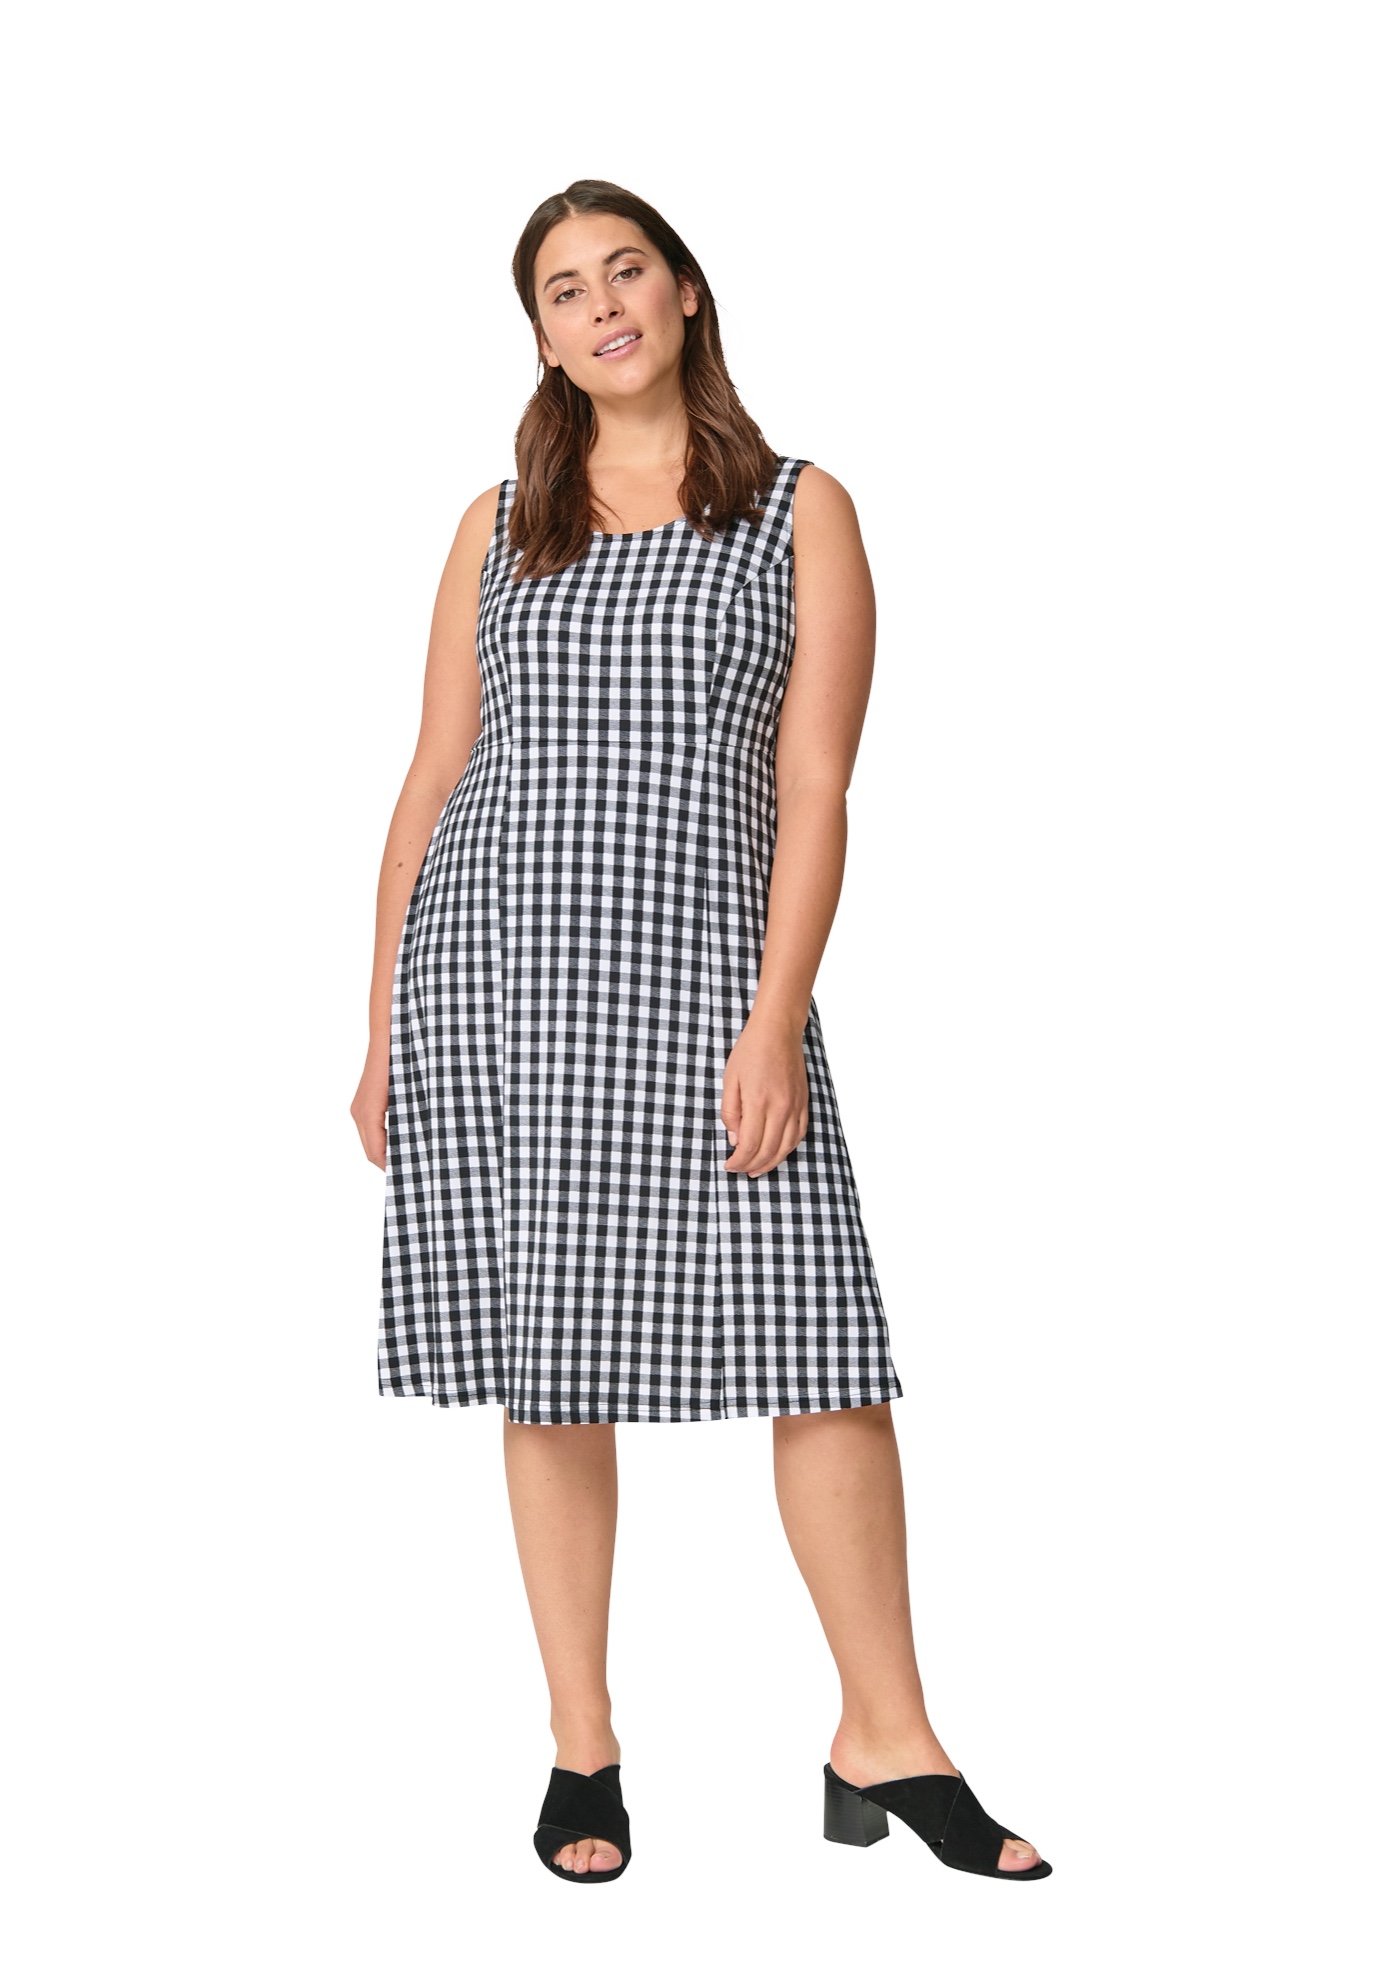 ellos Womens Plus Size Fit and Flare Knit Dress